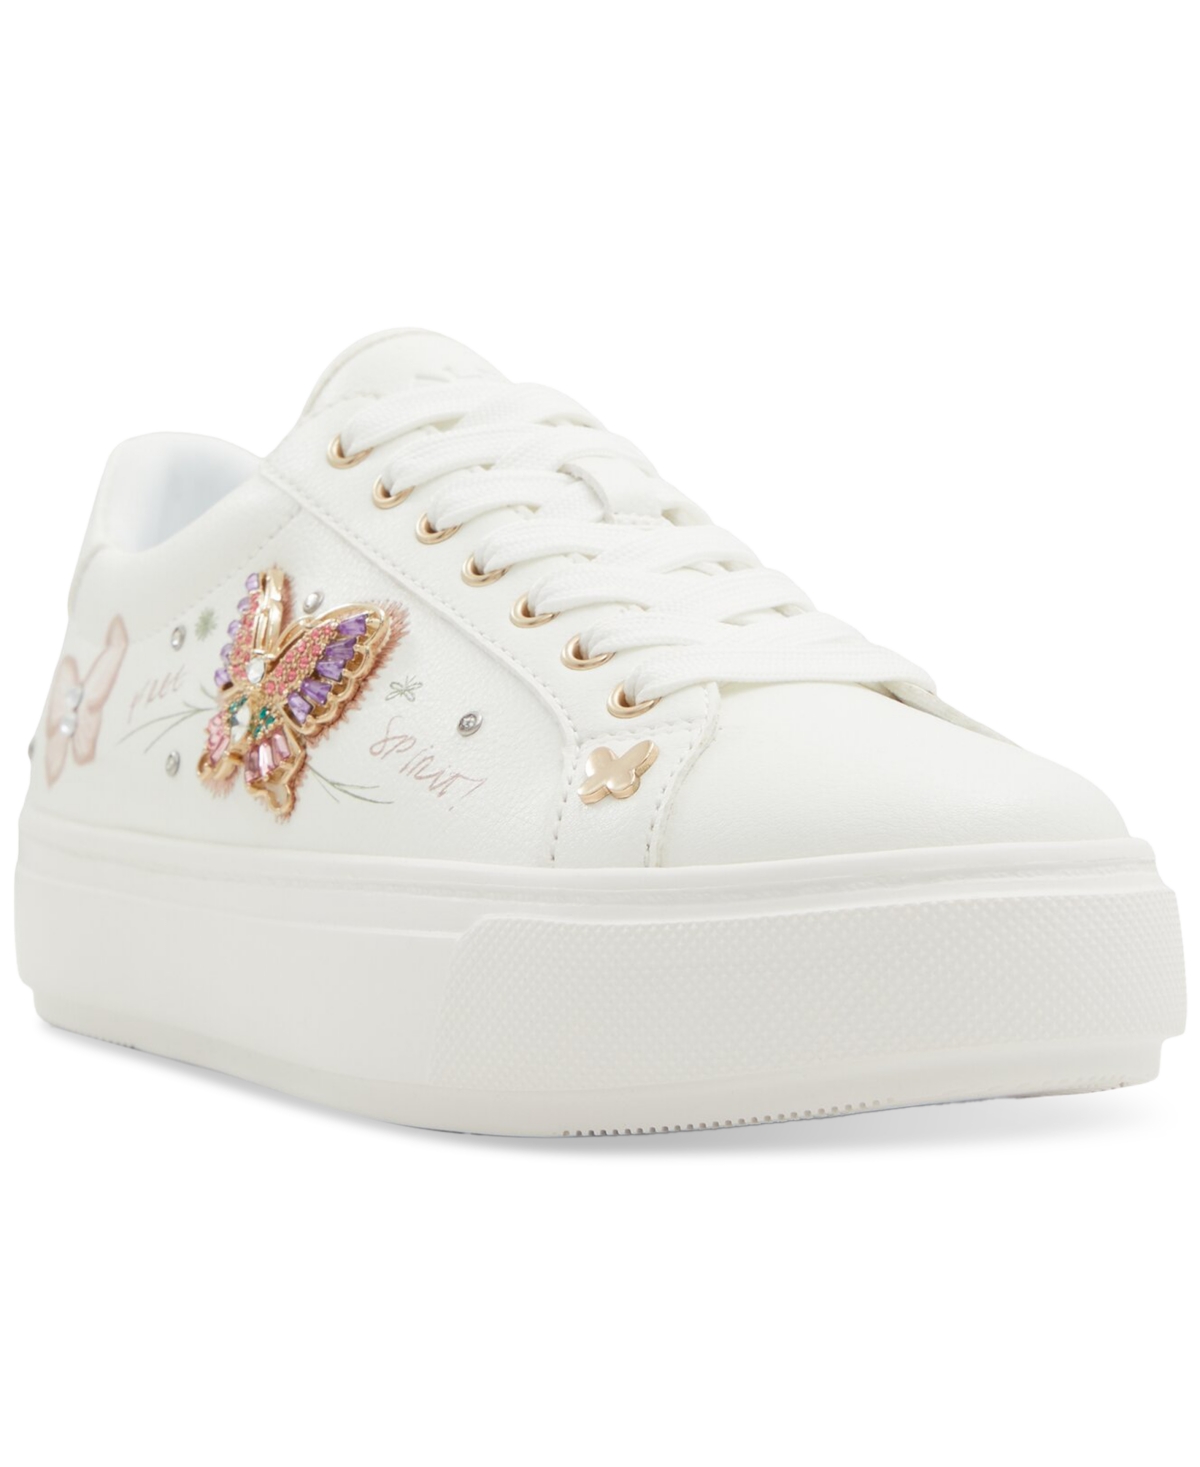 Women's Gwiri 2.0 Embellished Butterfly Court Sneakers - White